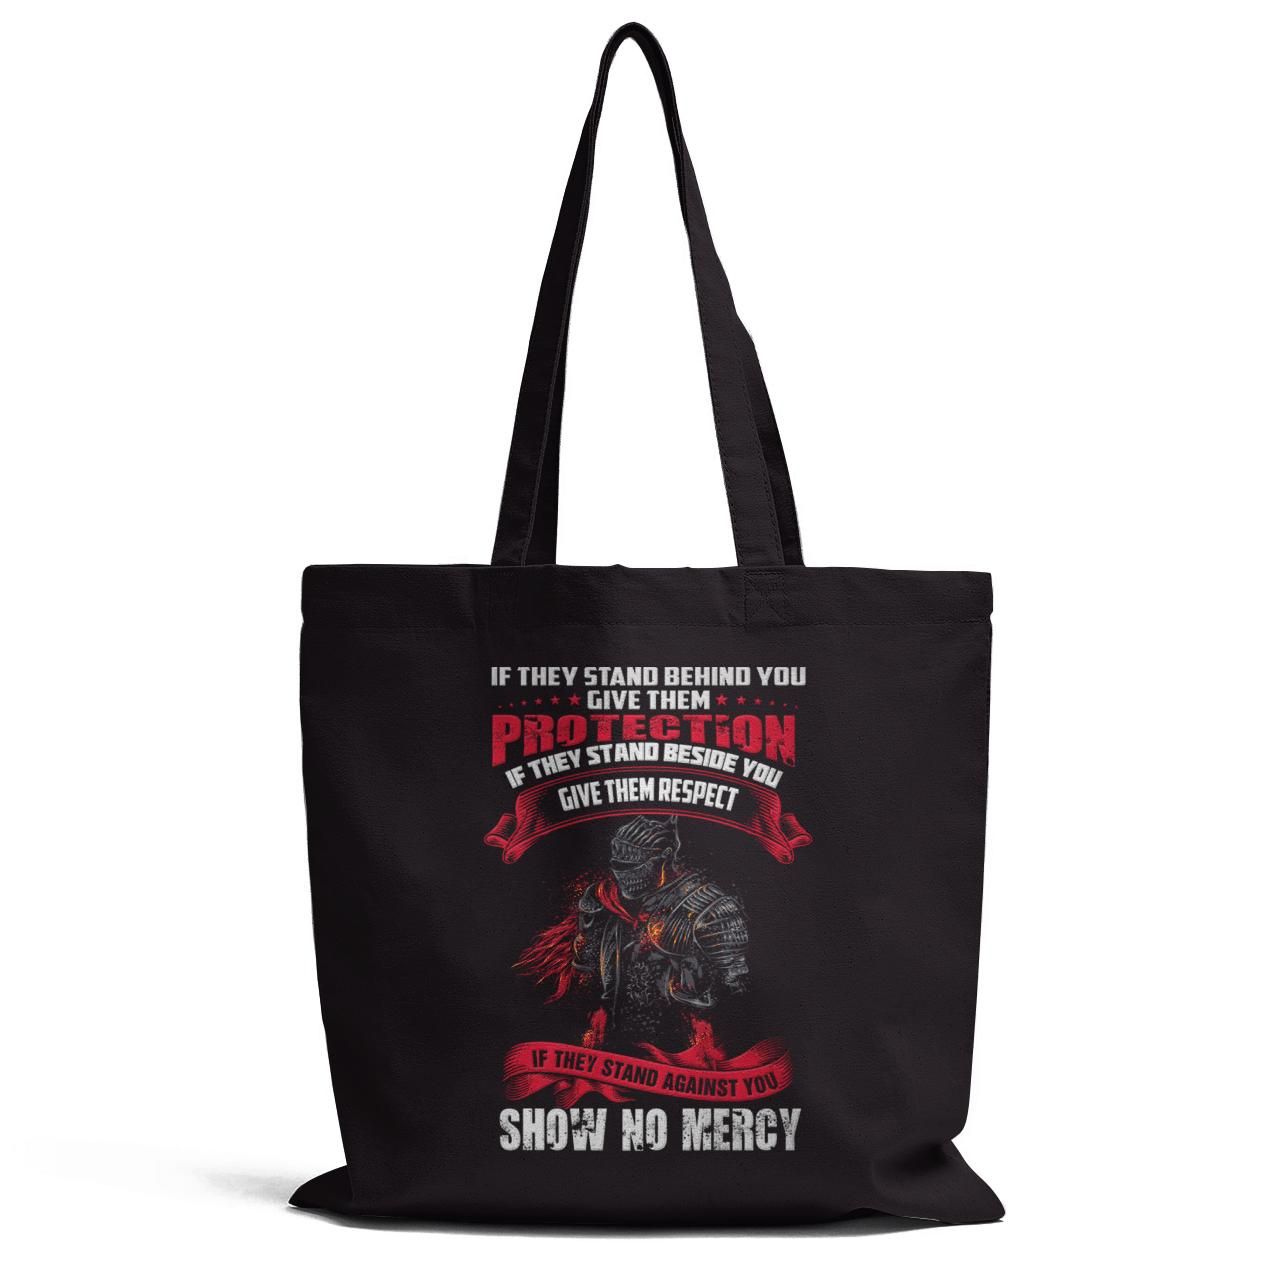 If They Stand Against You Show No Mercy Tote Bag